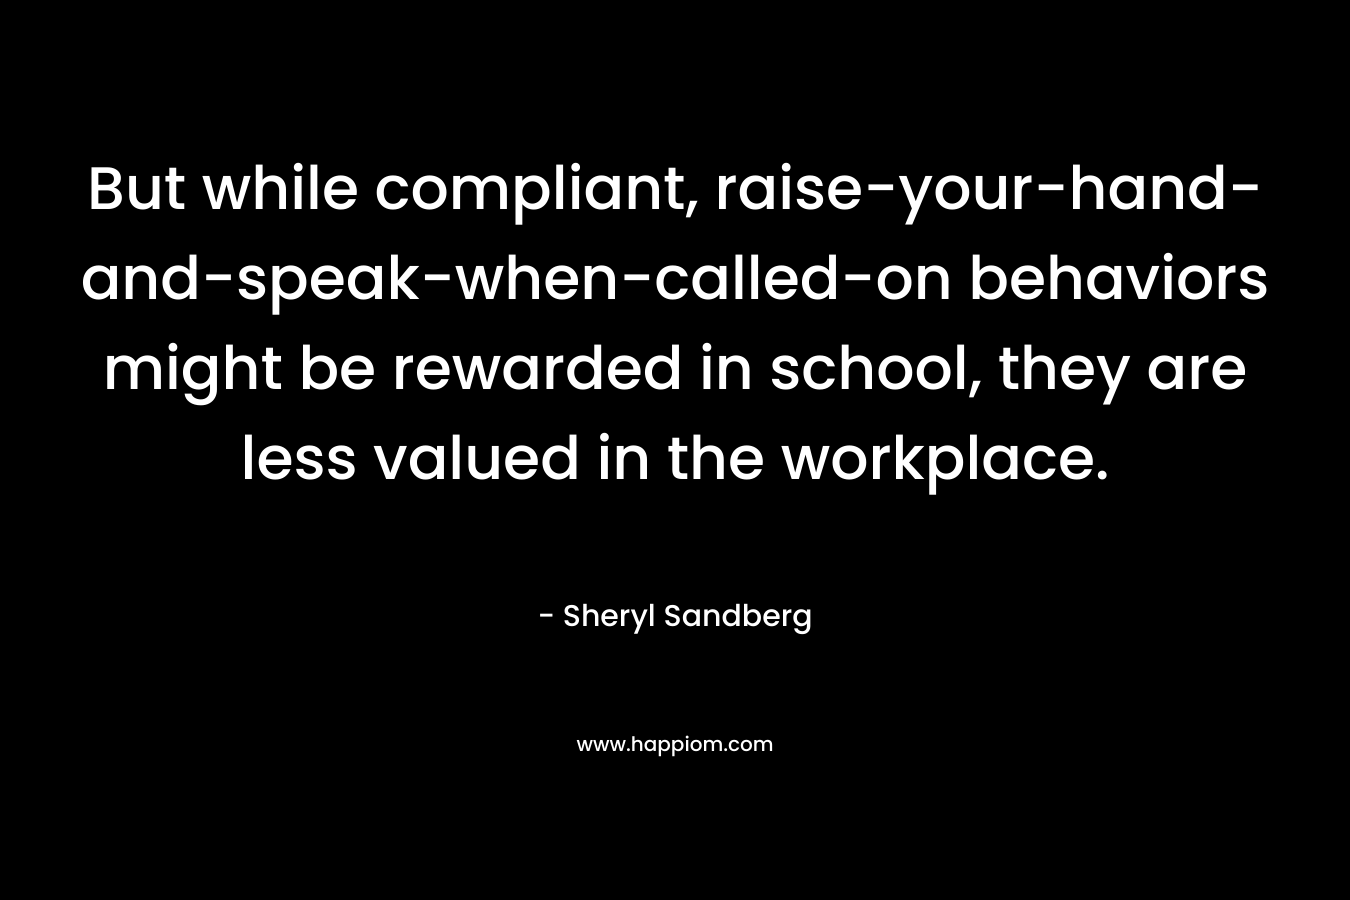 But while compliant, raise-your-hand-and-speak-when-called-on behaviors might be rewarded in school, they are less valued in the workplace. – Sheryl Sandberg